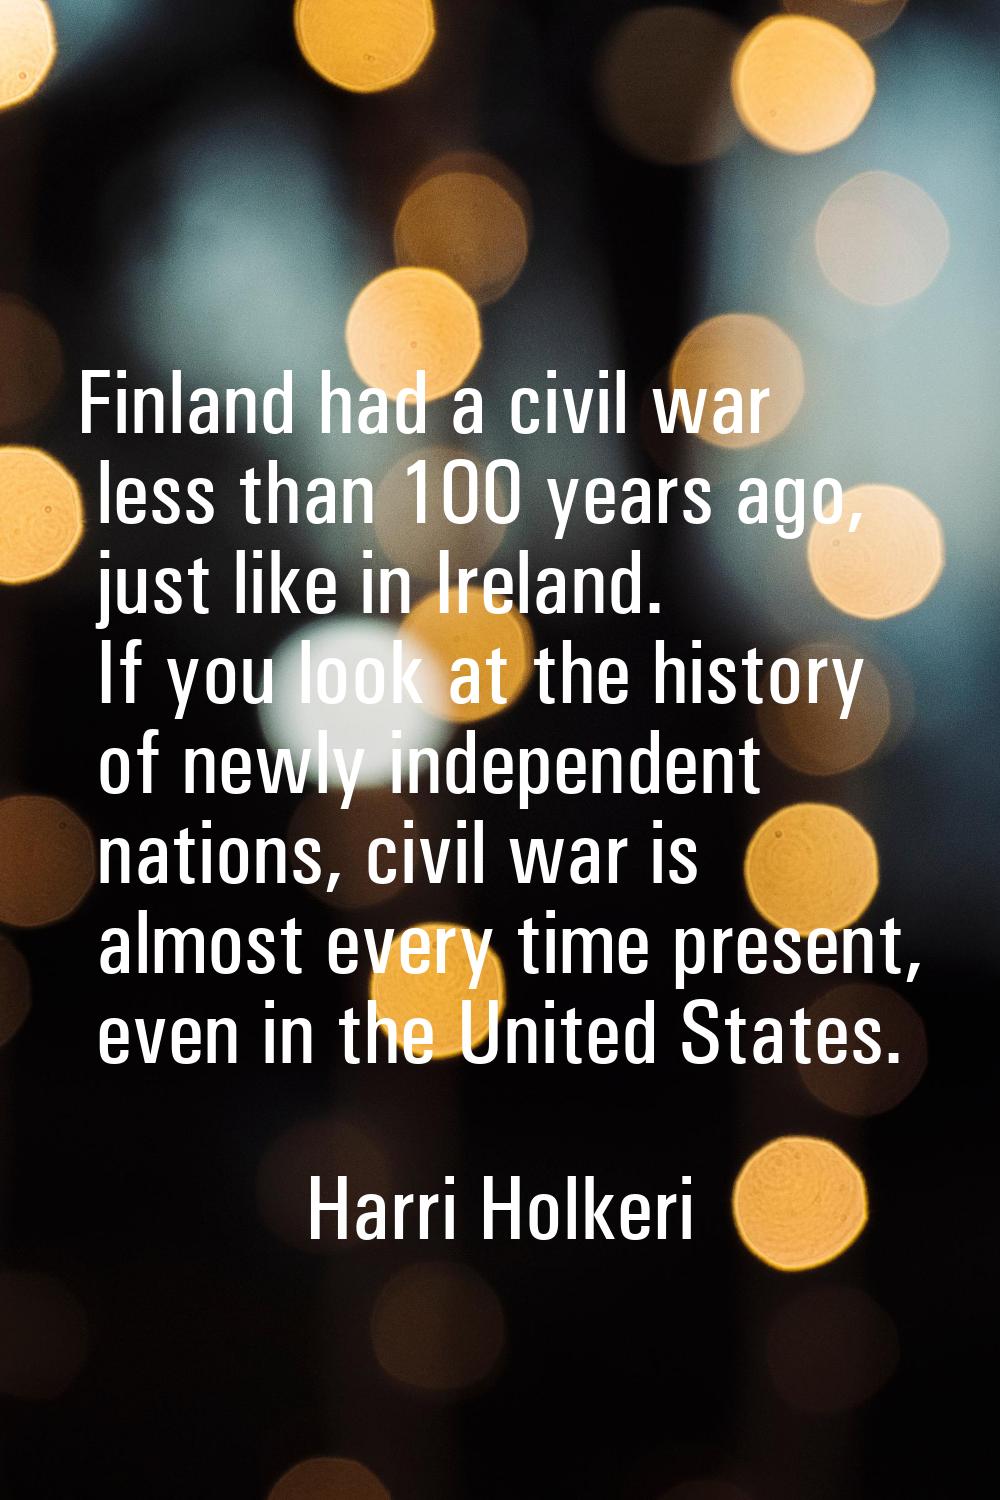 Finland had a civil war less than 100 years ago, just like in Ireland. If you look at the history o